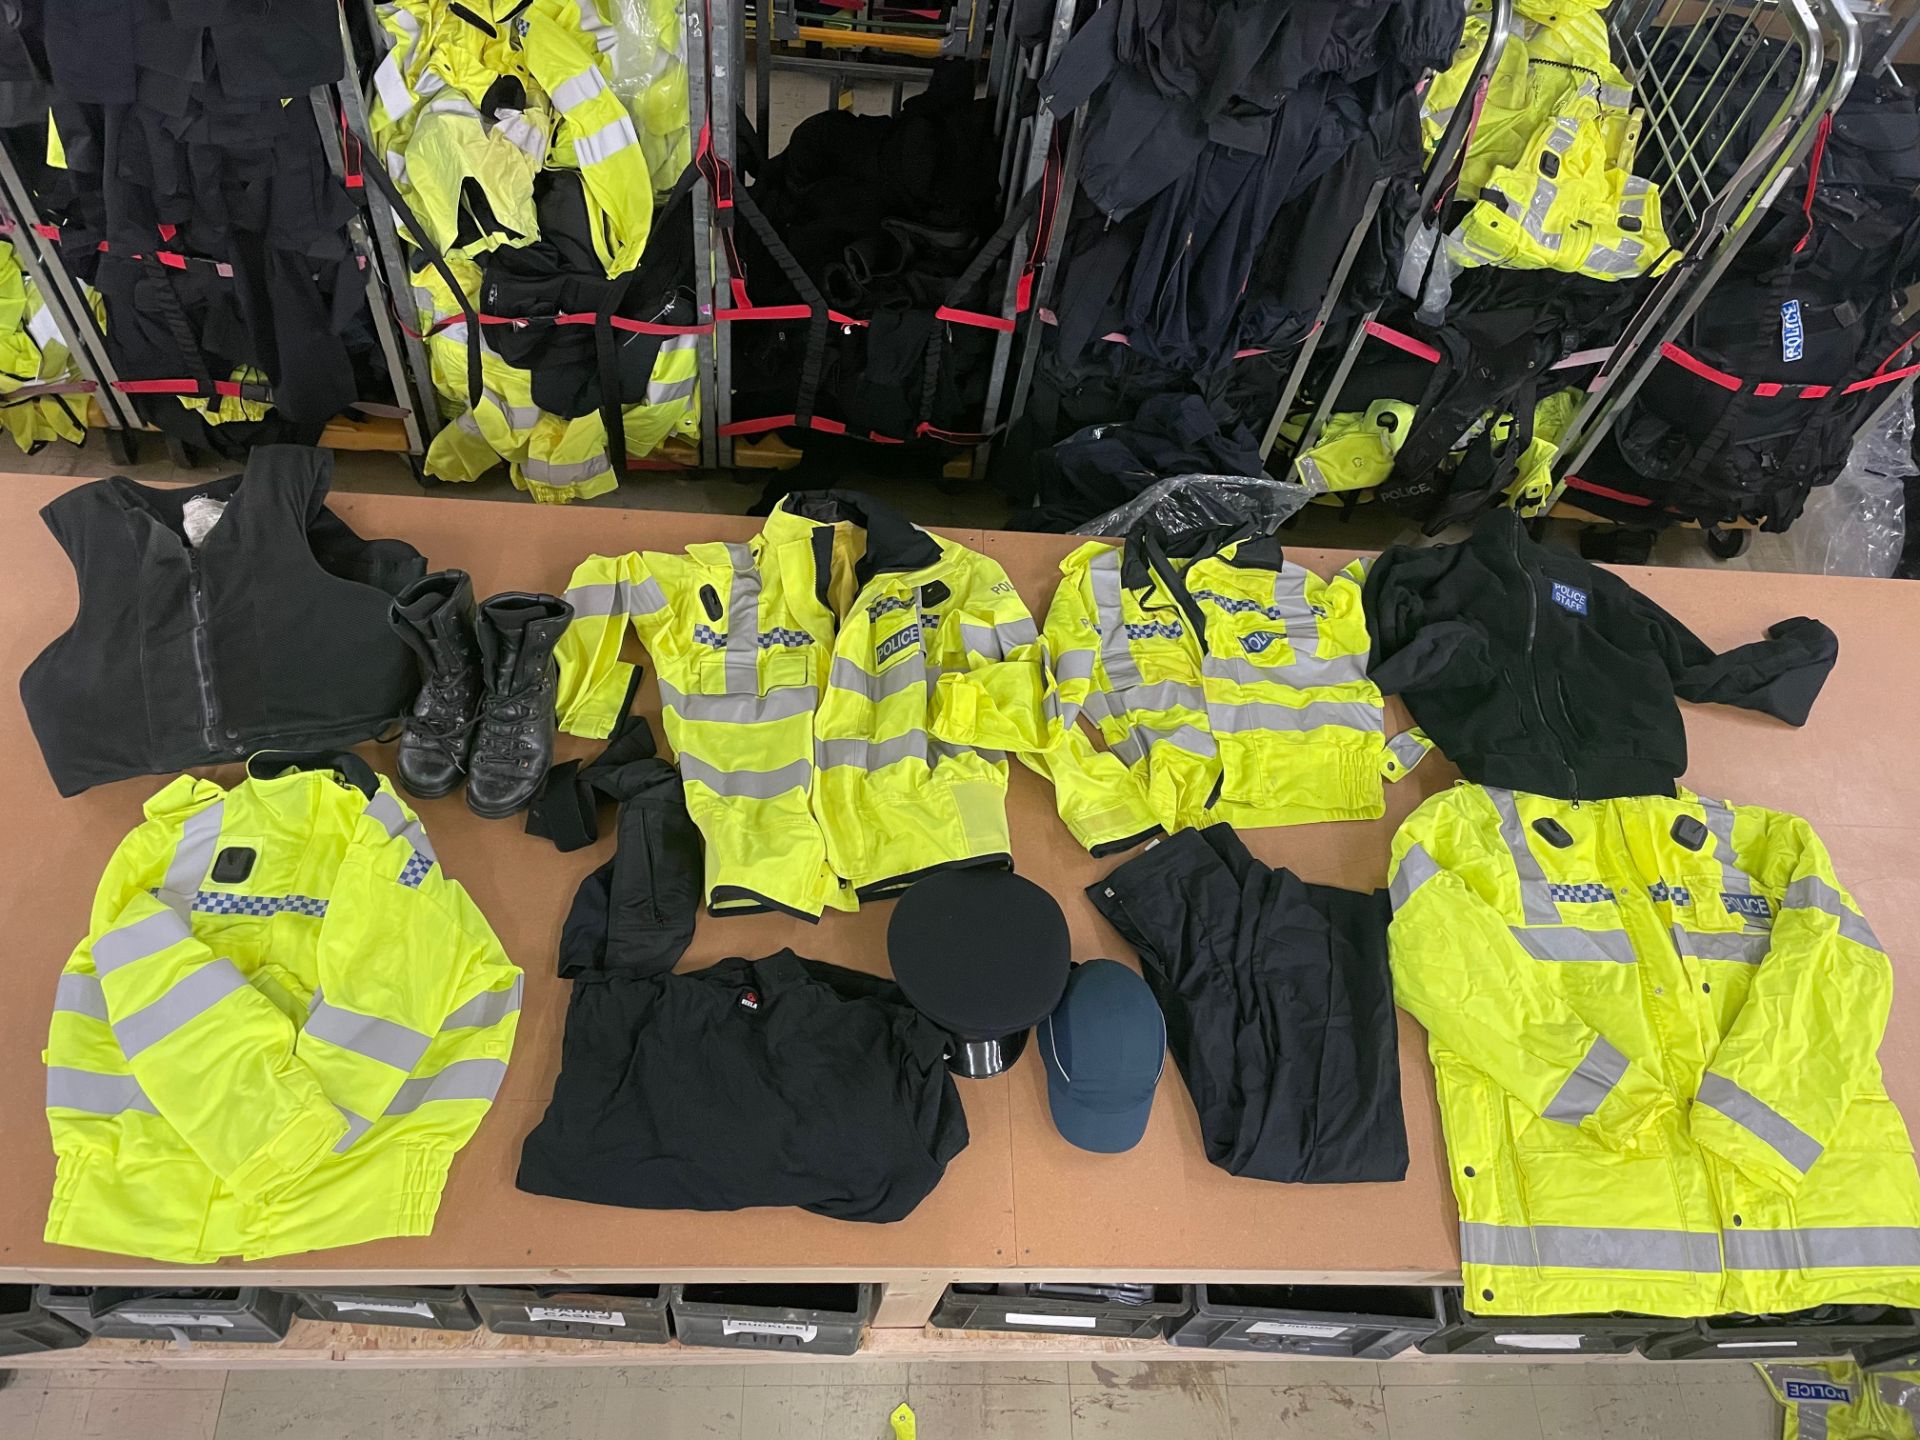 5 X BAGS STUFFED WITH EX POLICE UNIFORM CLOTHING & ACCESSORIES - RRP £1375.00 - NO VAT ON HAMMER - Bild 8 aus 12